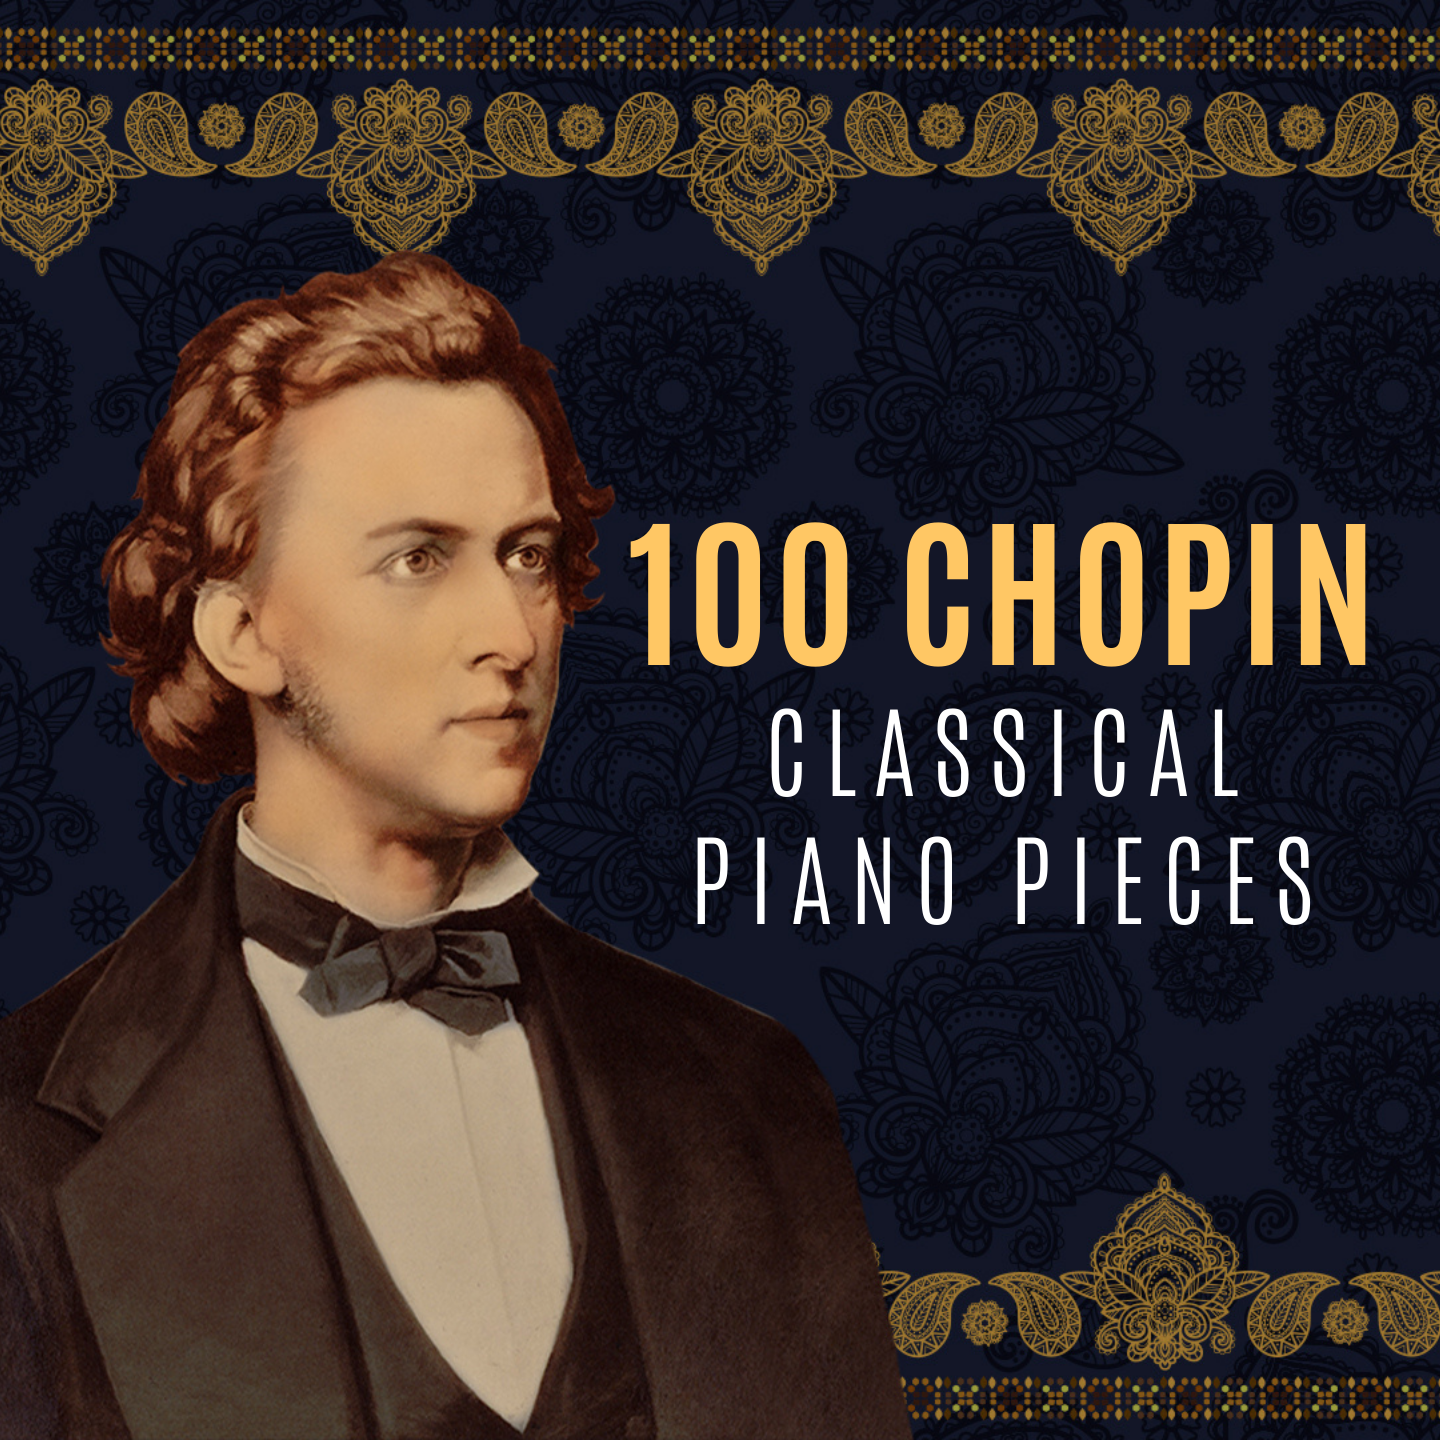 100 Chopin Classical Piano Pieces